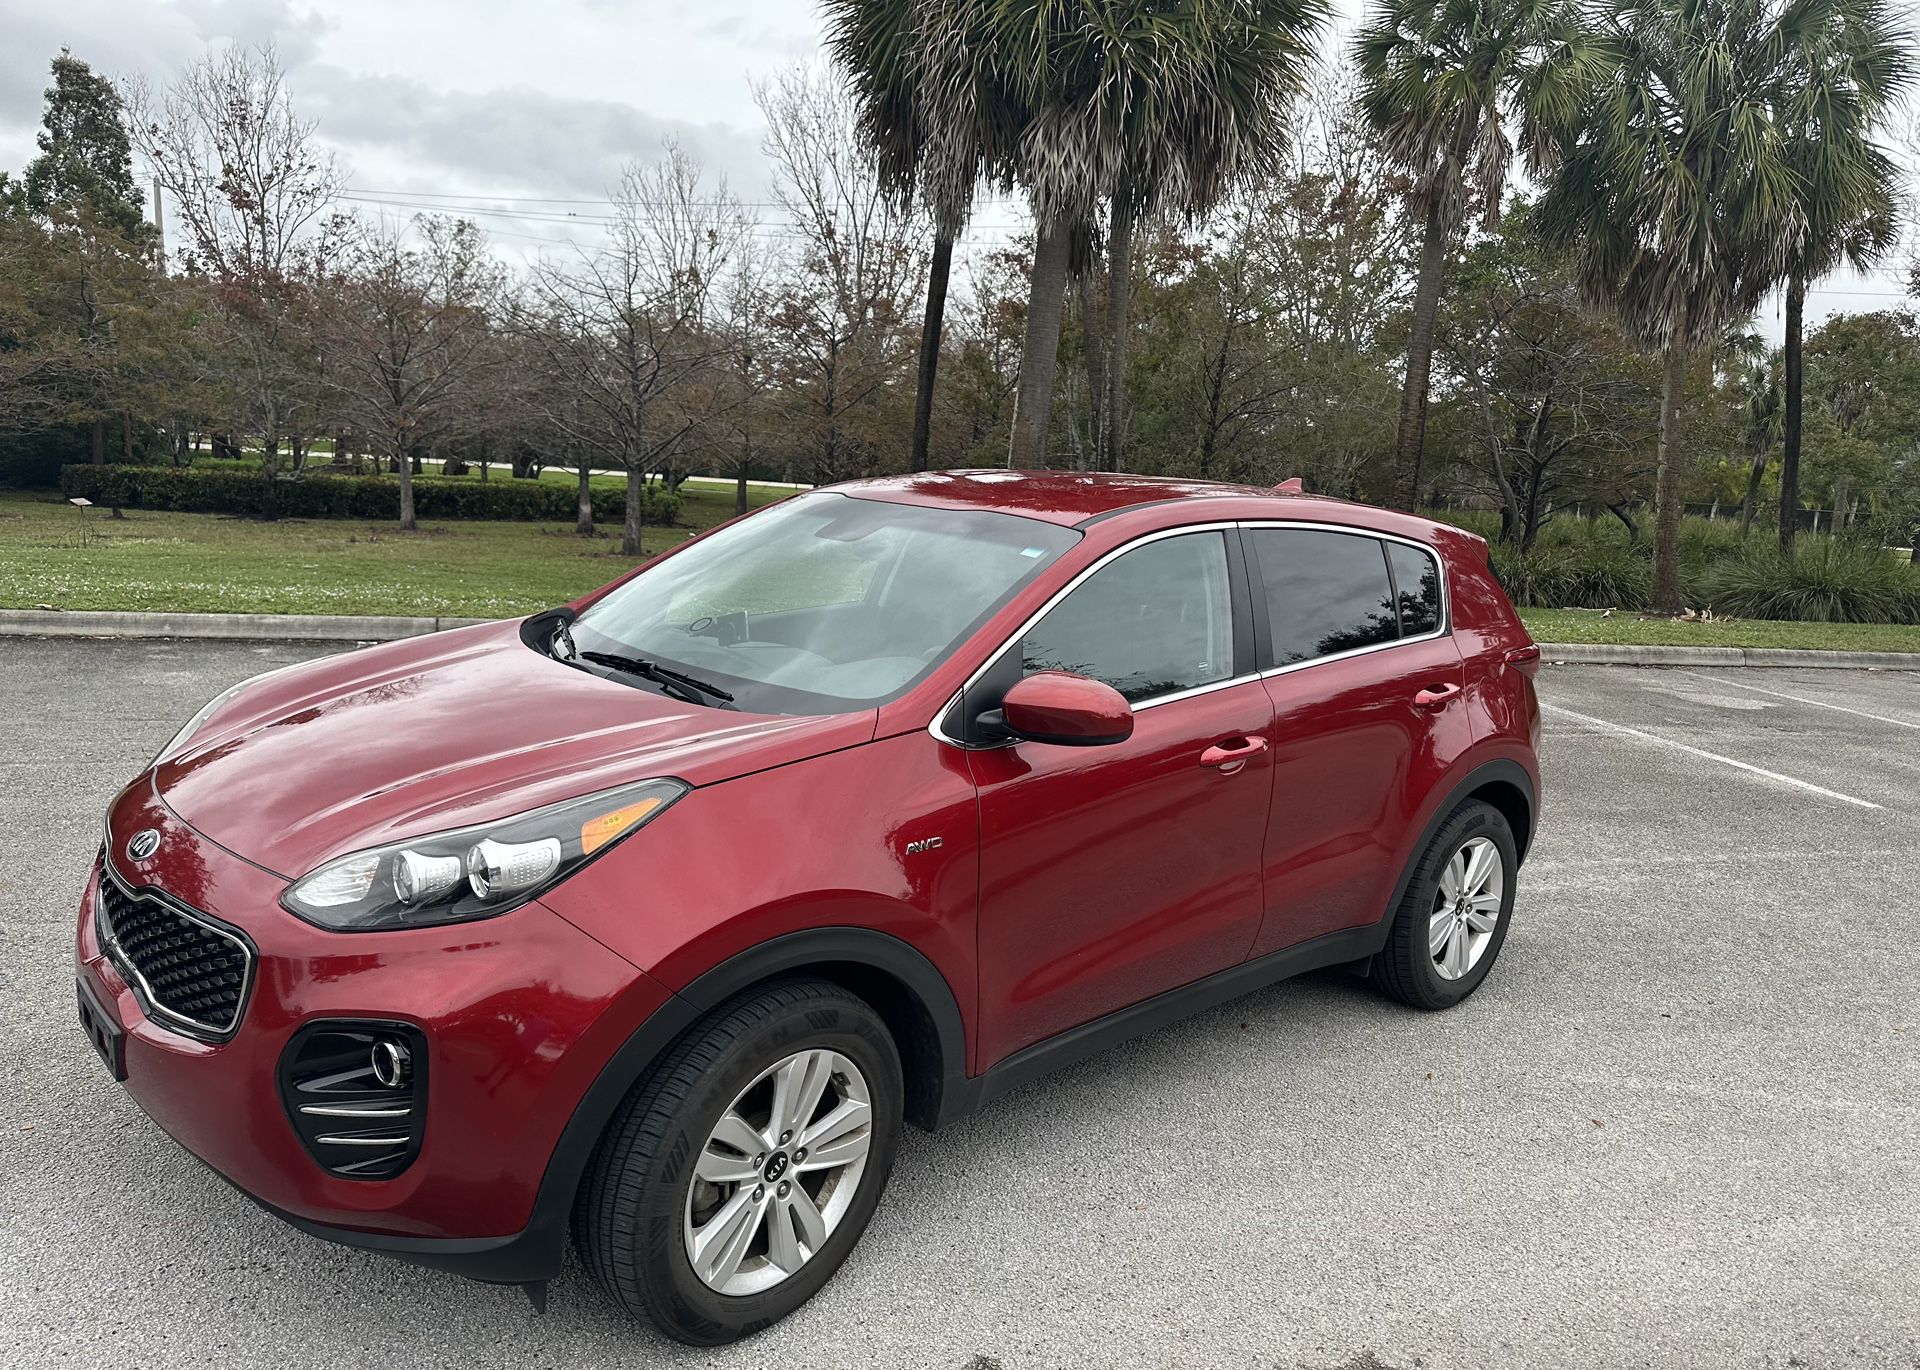 Kia Sportage! Horrible Credit? Need A Break! I don’t Care About The Credit!